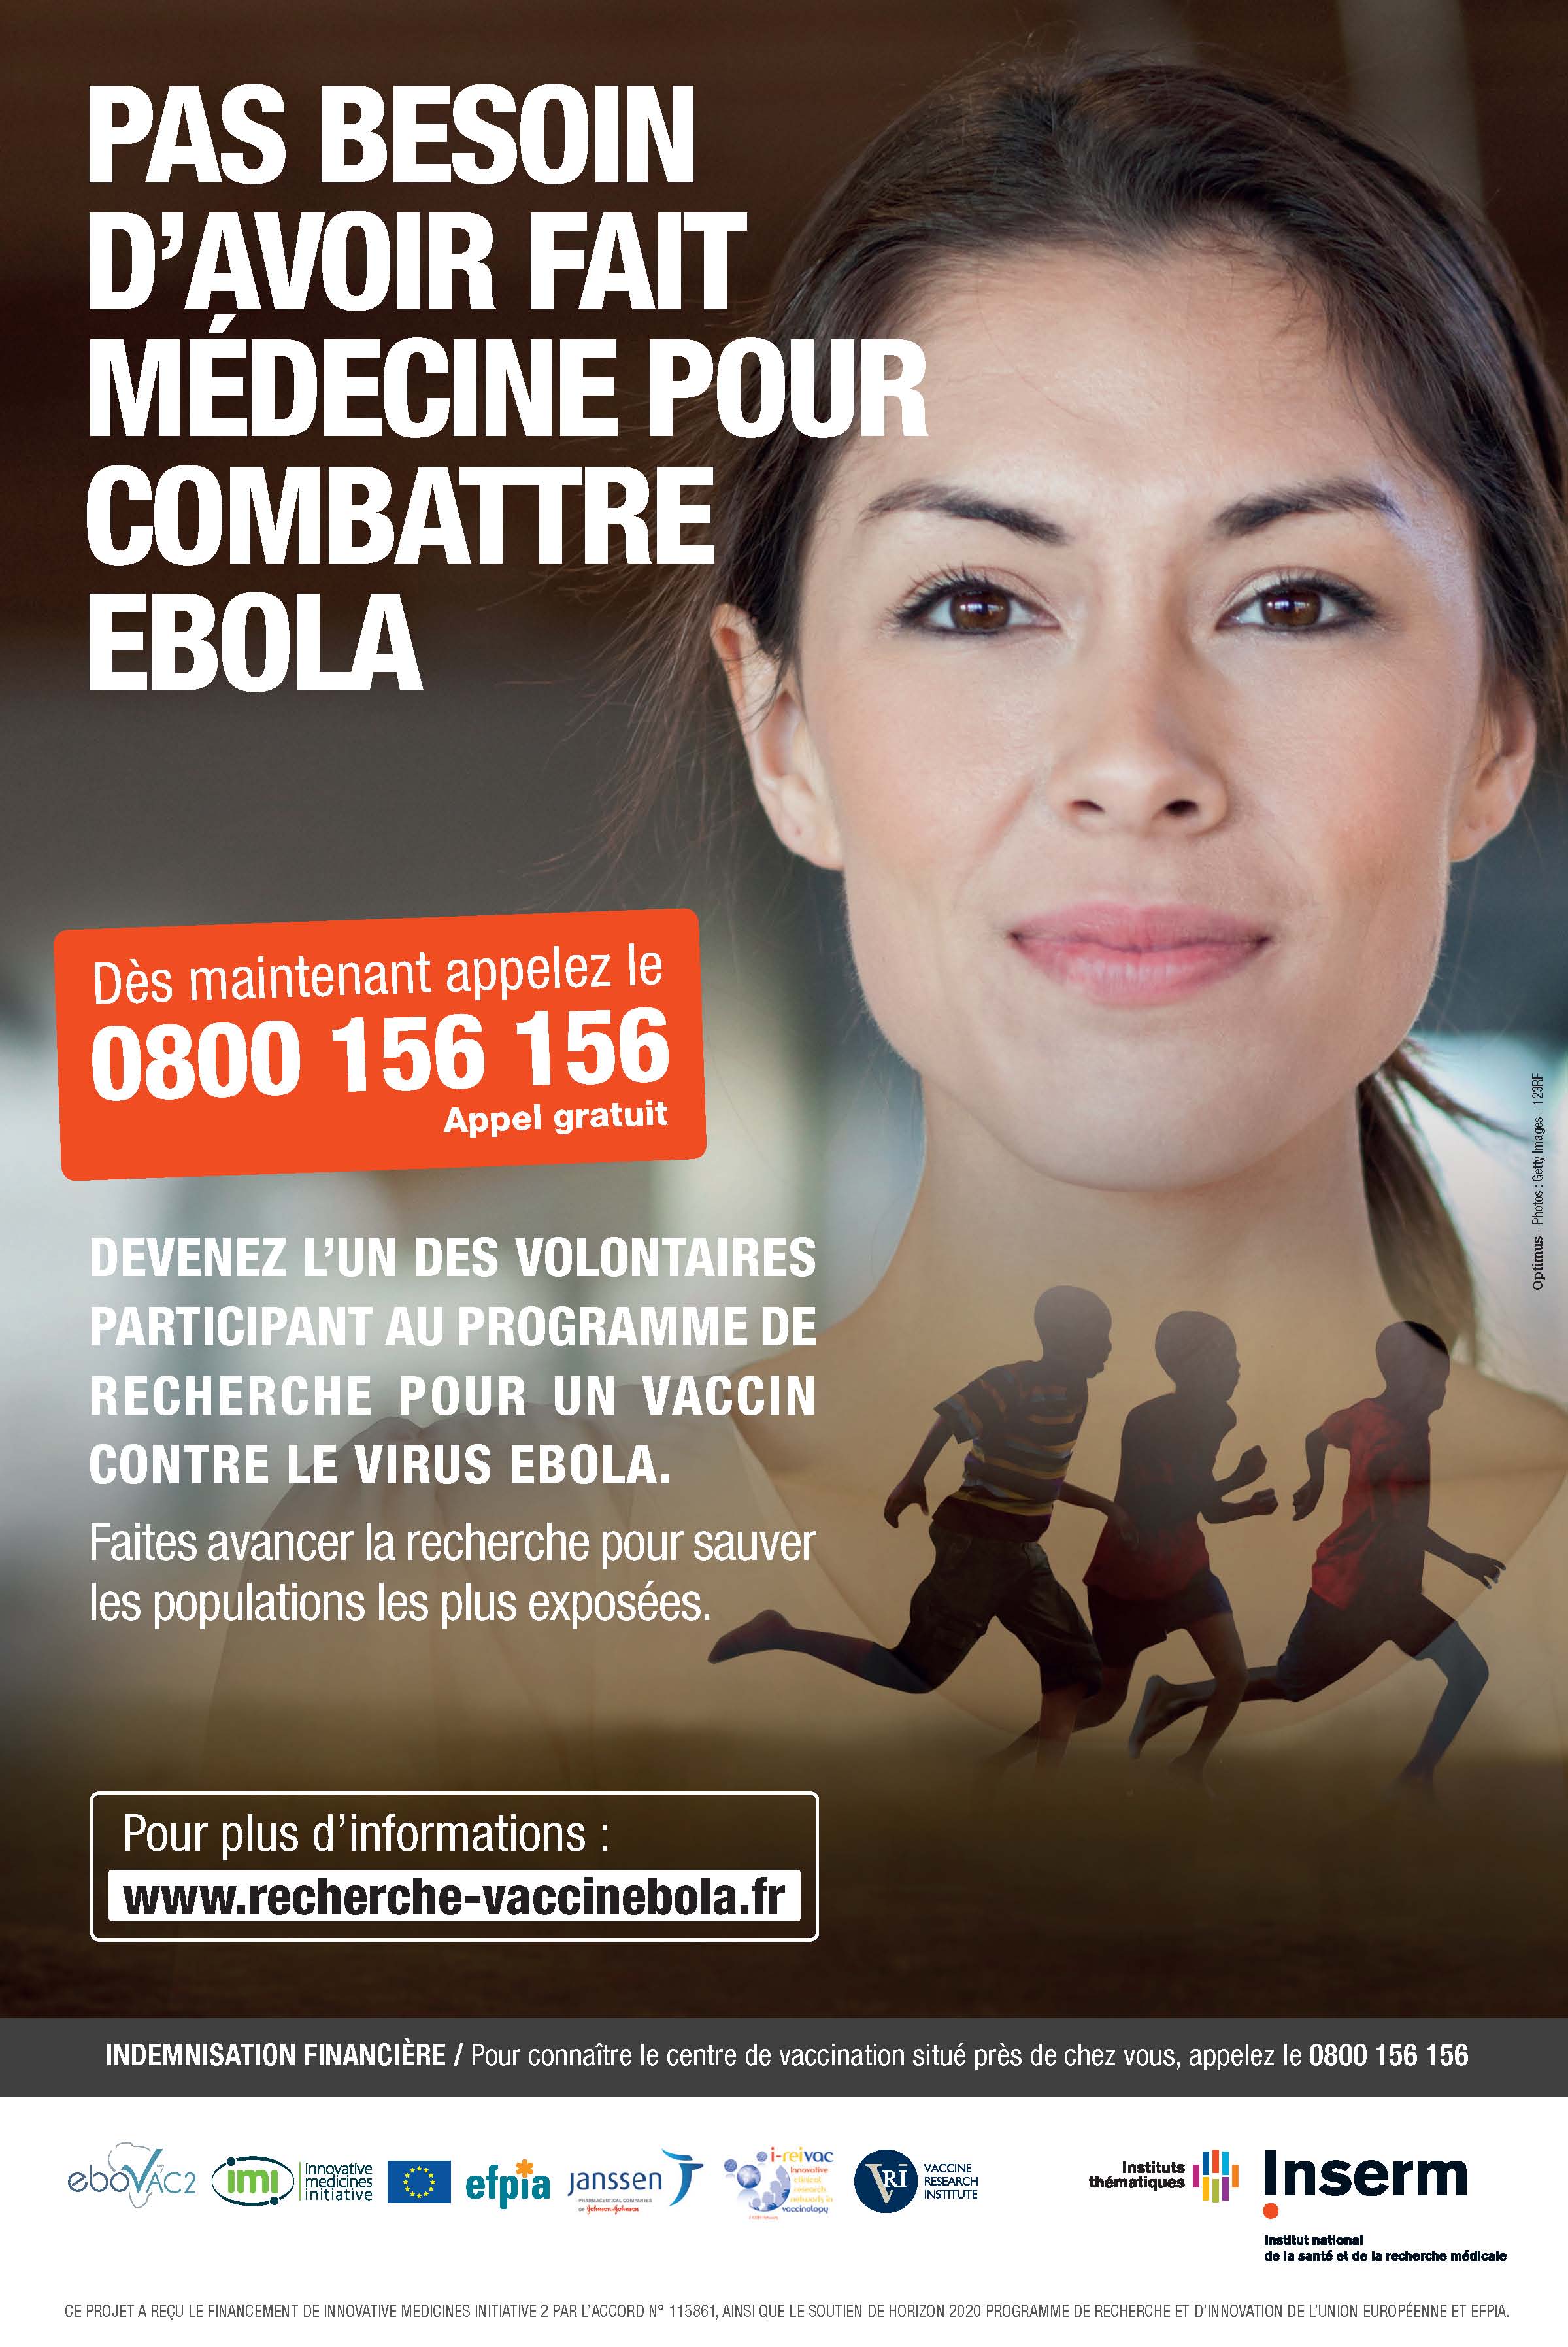 Inserm recruiting about 300 volunteers to test vaccine against the Ebola virus